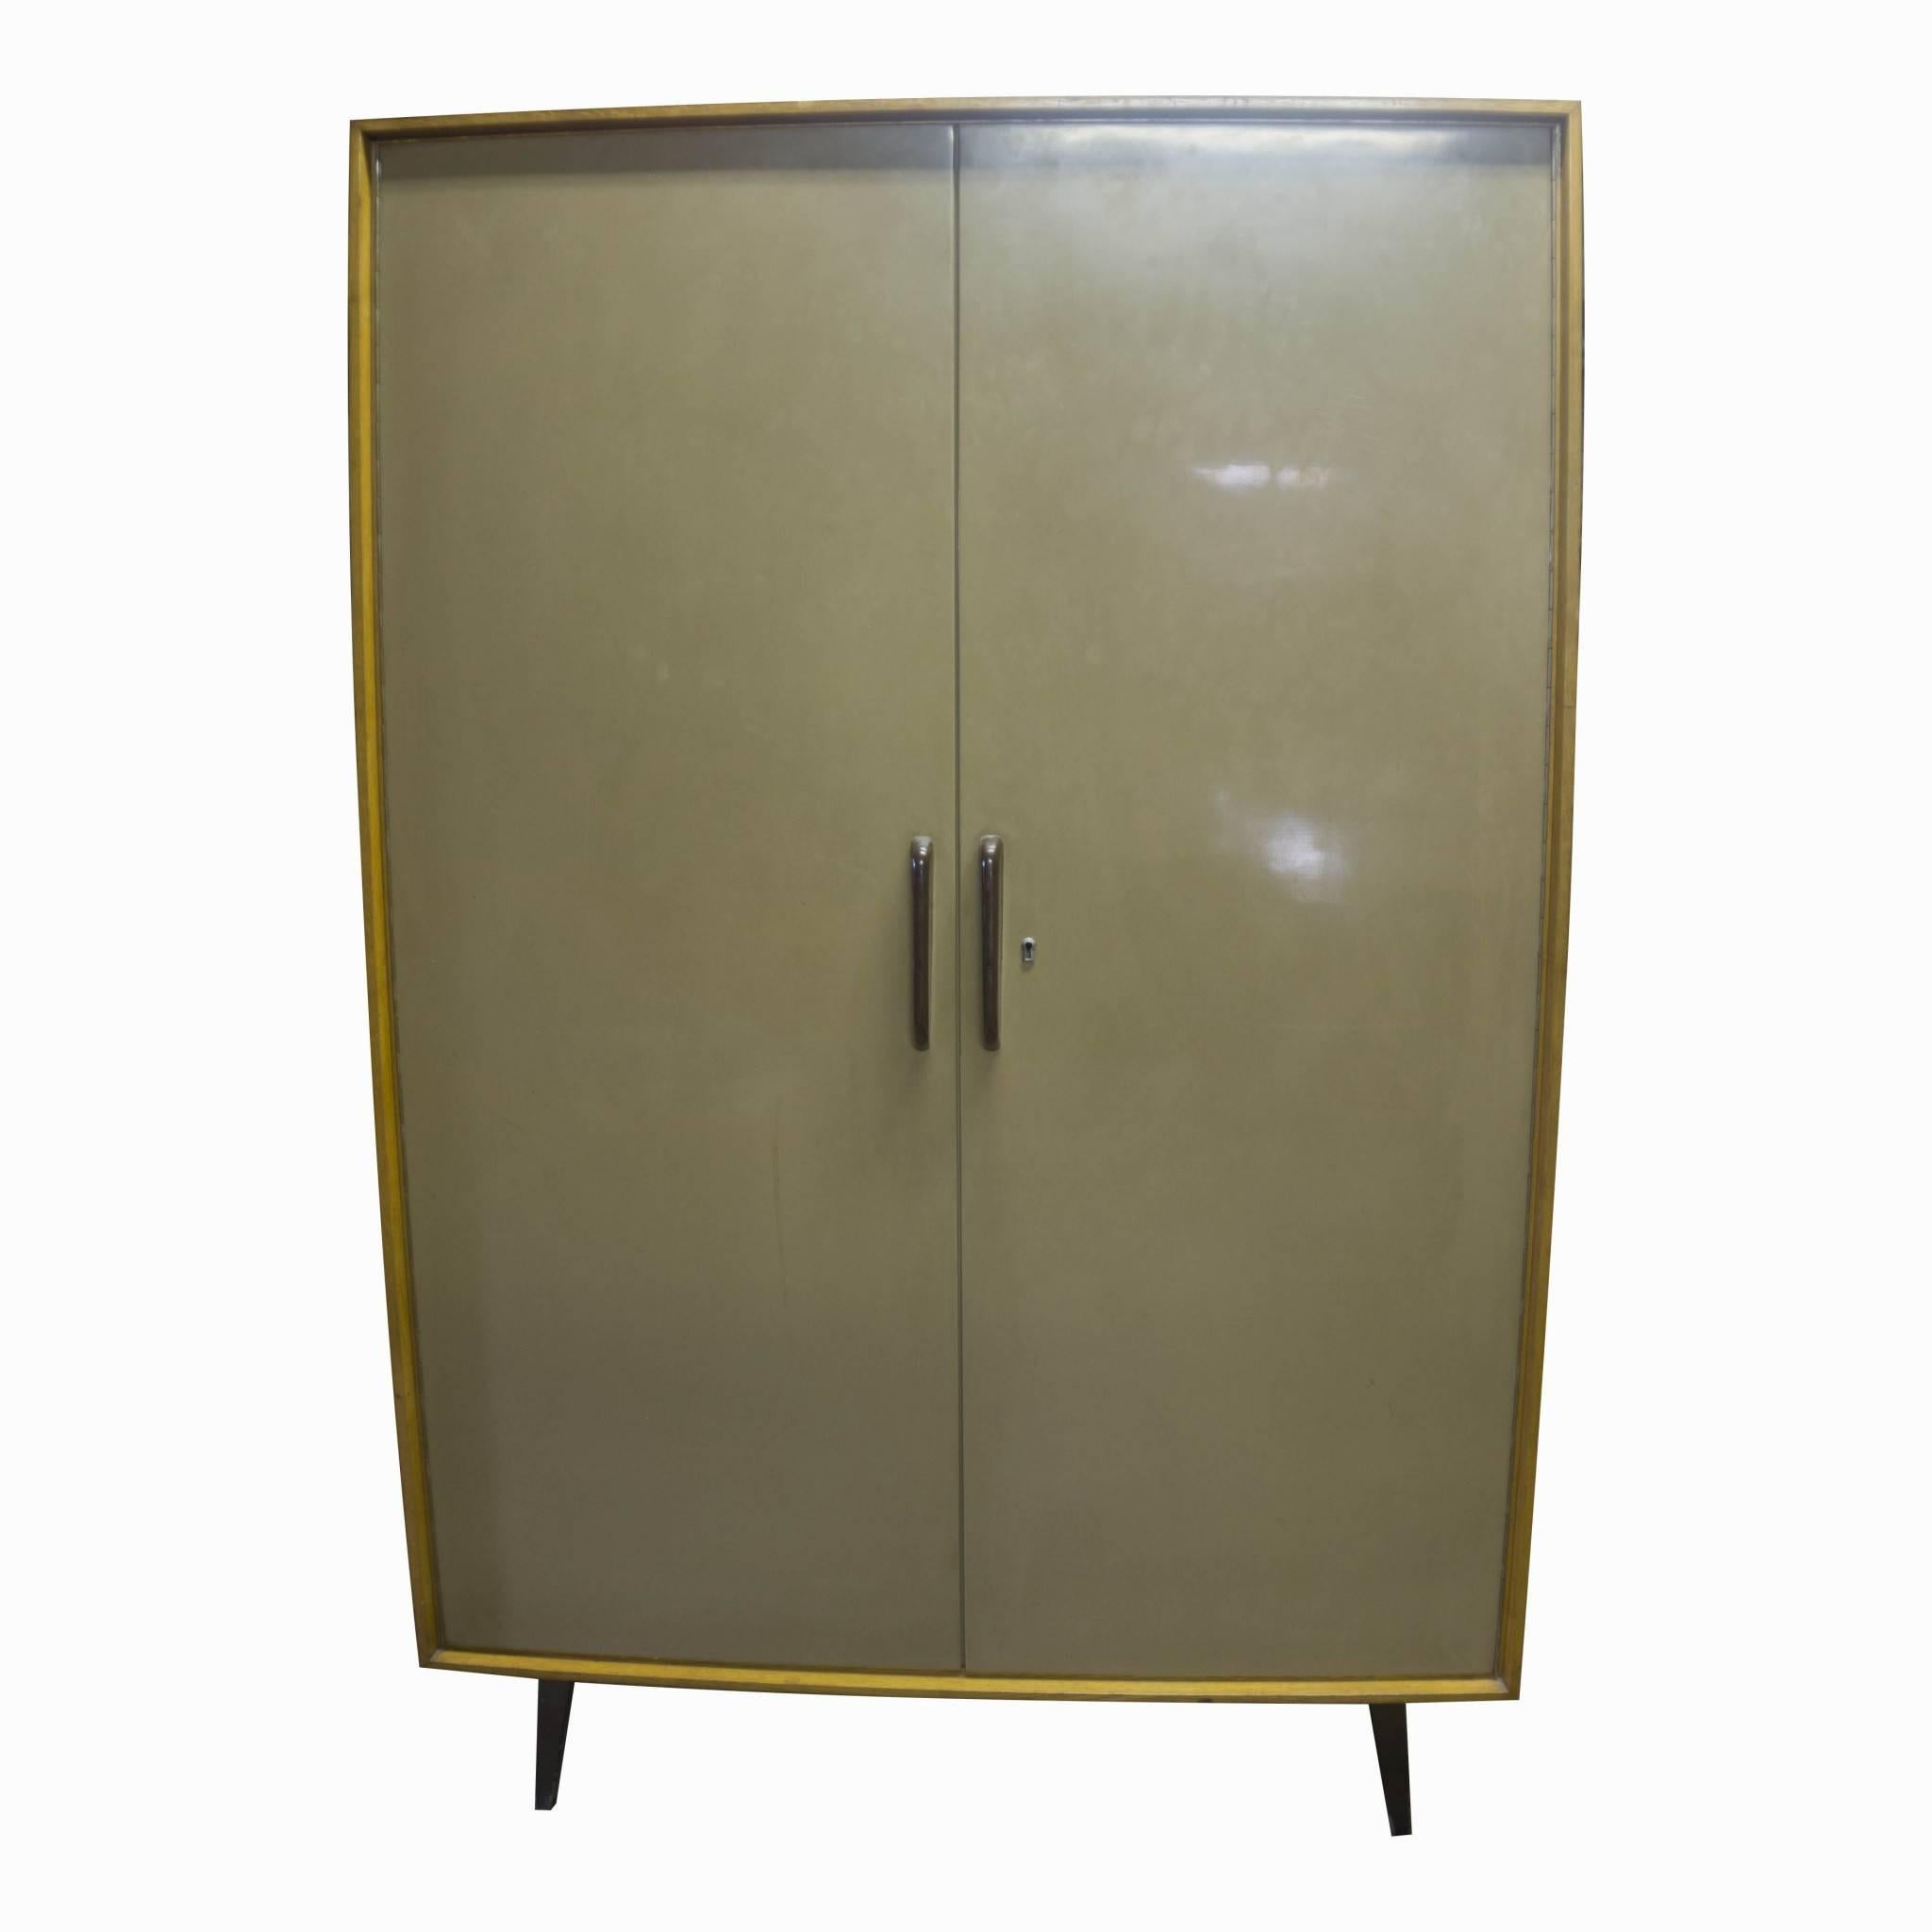 This set of three free standing cabinets was designed in 1960 and made in 1961 for a Czech exhibition that was associated with the EXPO 58 in Brussels.
Measurements for the three cabinets: cabinet No.1 : 114 x 175 x 47 cm (LxHxD) cabinet No.2 : 114